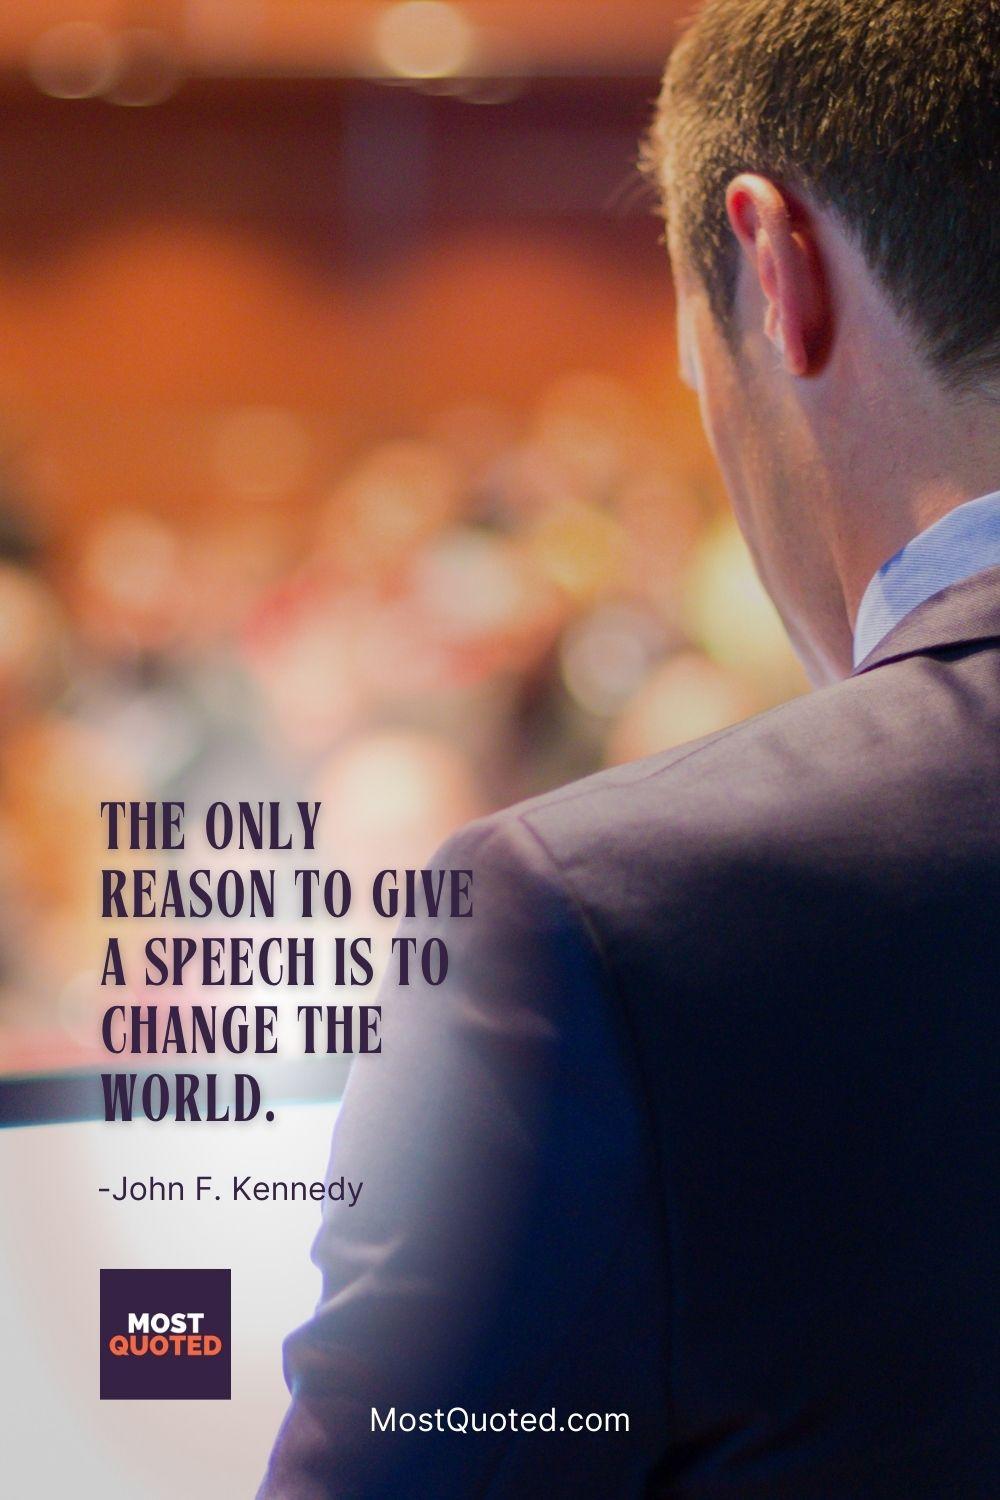 The only reason to give a speech is to change the world. - John F. Kennedy